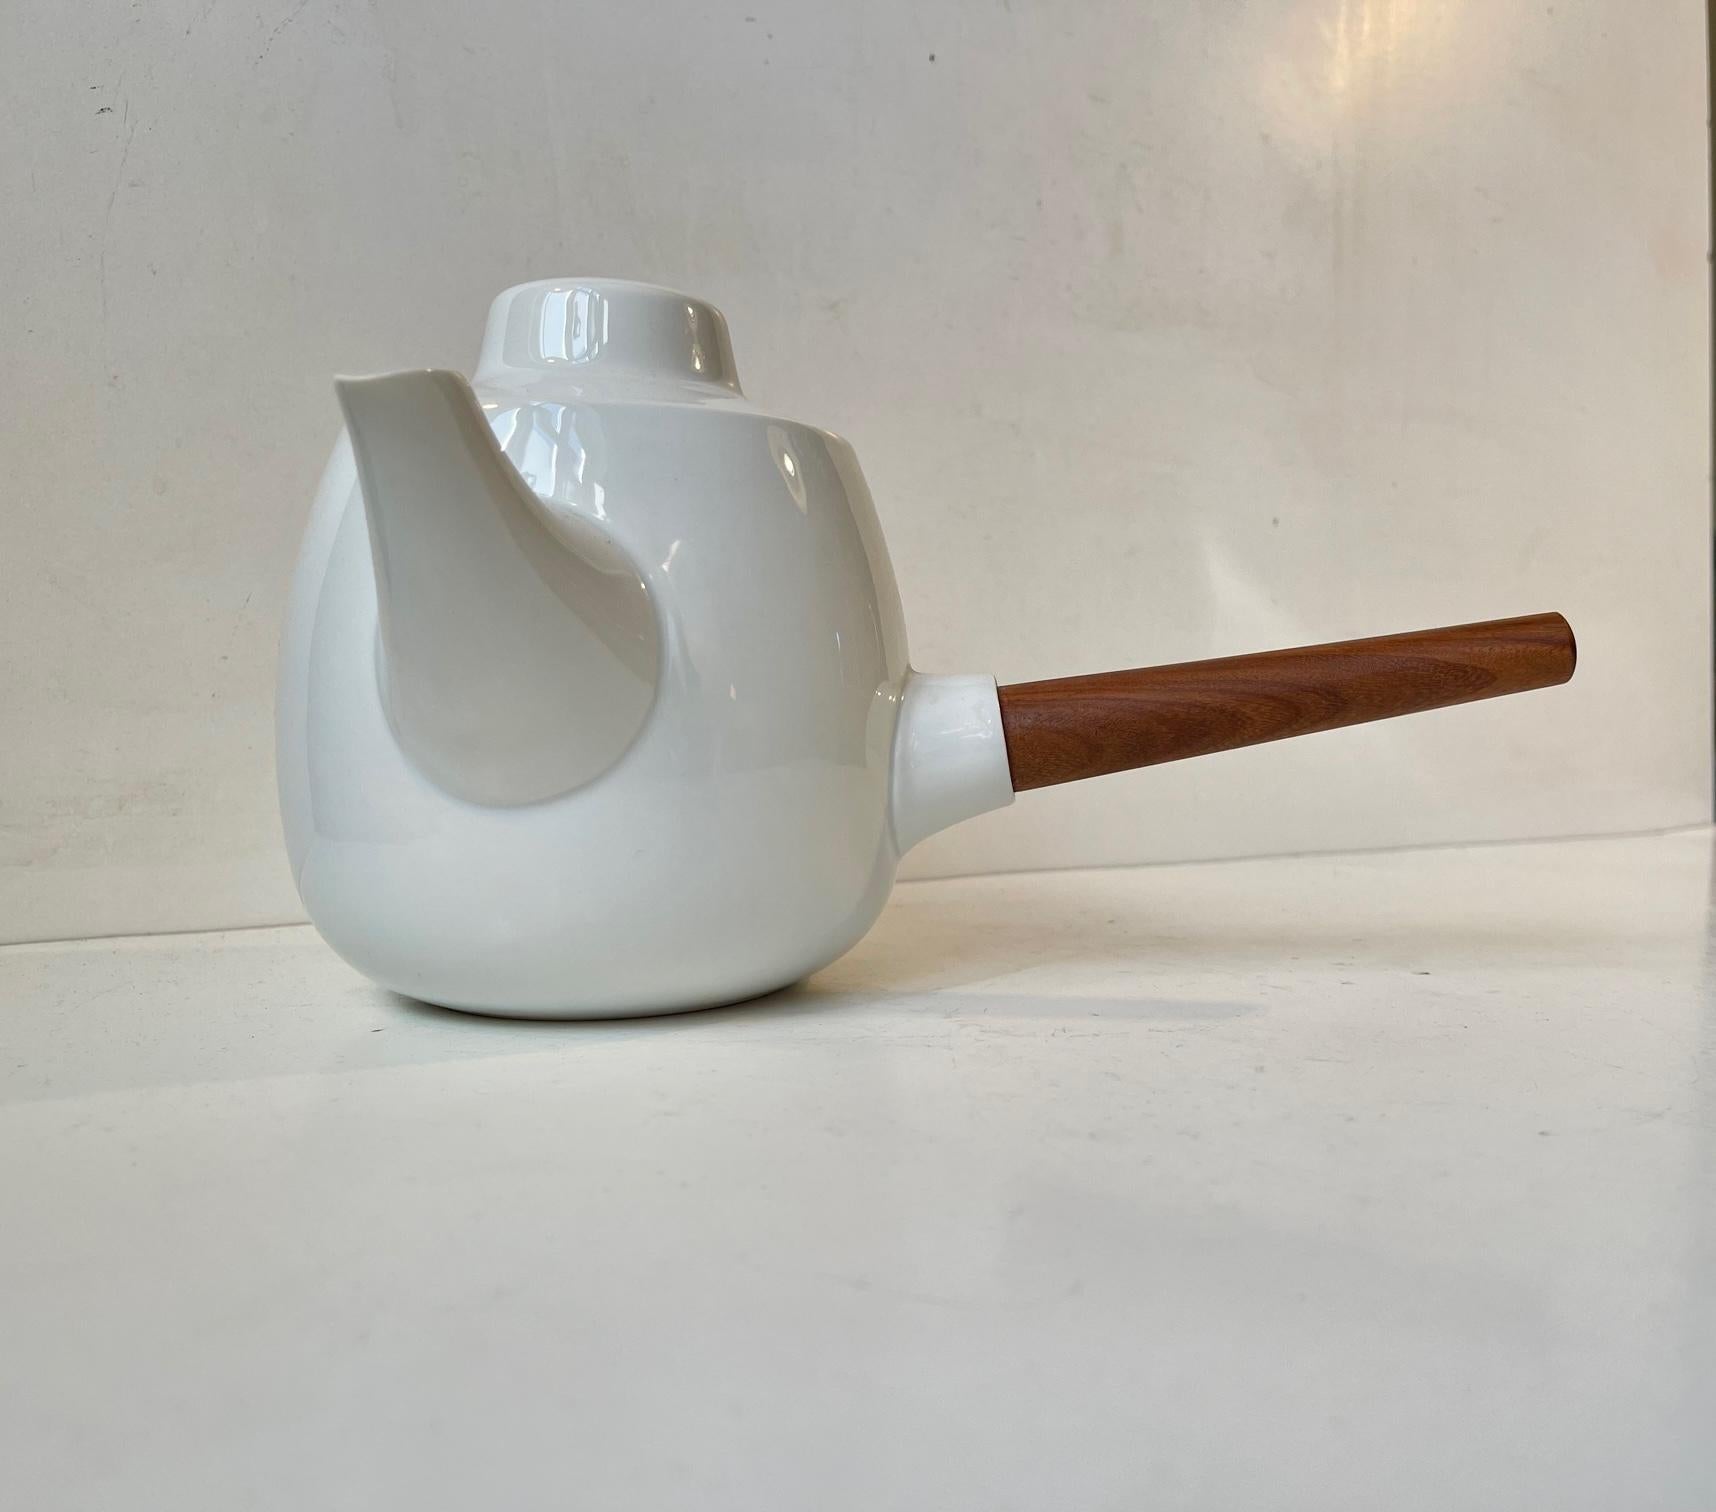 Important design by Henning Koppel exhibited at the British Museum and Museum of Modern Art in New York. This set consist of a milk/sugar jug/bowl and the Koppel Characteristic teapot with its tapered handle in solid teak. It is called Form 24 and